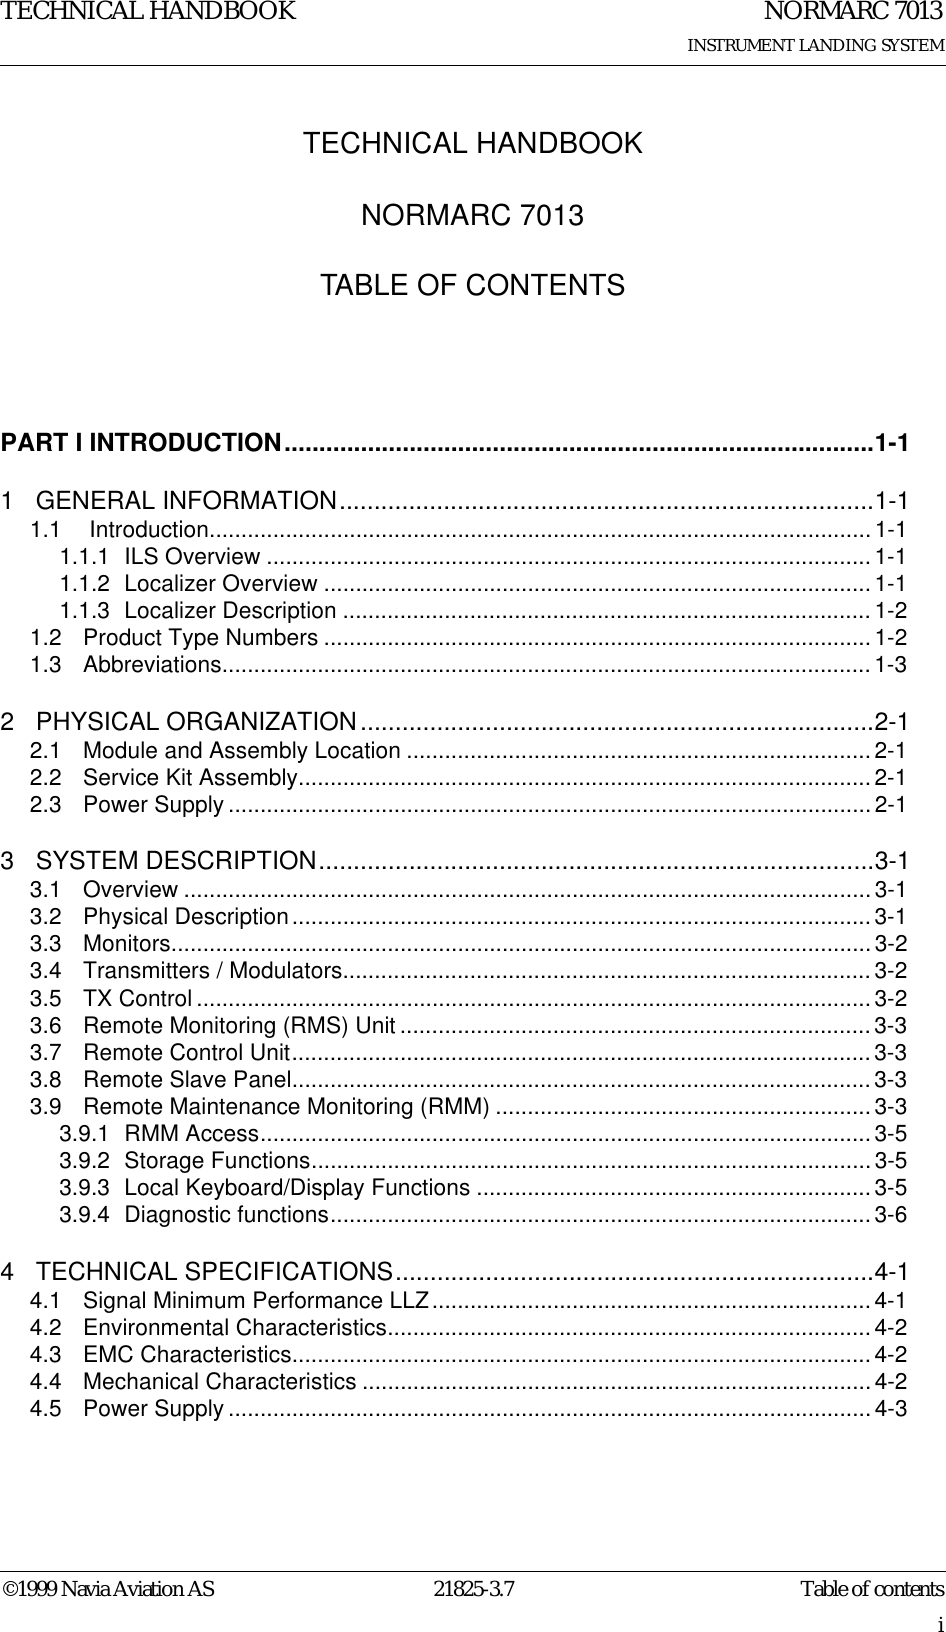 TECHNICAL HANDBOOK©1999 Navia Aviation AS 21825-3.7iTECHNICAL HANDBOOKNORMARC 7013TABLE OF CONTENTSNORMARC 7013INSTRUMENT LANDING SYSTEMTable of contentsPART I INTRODUCTION.....................................................................................1-11 GENERAL INFORMATION.............................................................................1-11.1  Introduction........................................................................................................1-11.1.1 ILS Overview ............................................................................................... 1-11.1.2 Localizer Overview ...................................................................................... 1-11.1.3 Localizer Description ................................................................................... 1-21.2 Product Type Numbers ...................................................................................... 1-21.3 Abbreviations...................................................................................................... 1-32 PHYSICAL ORGANIZATION..........................................................................2-12.1 Module and Assembly Location .........................................................................2-12.2 Service Kit Assembly..........................................................................................2-12.3 Power Supply .....................................................................................................2-13 SYSTEM DESCRIPTION................................................................................3-13.1 Overview ............................................................................................................ 3-13.2 Physical Description........................................................................................... 3-13.3 Monitors.............................................................................................................. 3-23.4 Transmitters / Modulators...................................................................................3-23.5 TX Control .......................................................................................................... 3-23.6 Remote Monitoring (RMS) Unit .......................................................................... 3-33.7 Remote Control Unit........................................................................................... 3-33.8 Remote Slave Panel........................................................................................... 3-33.9 Remote Maintenance Monitoring (RMM) ...........................................................3-33.9.1 RMM Access................................................................................................ 3-53.9.2 Storage Functions........................................................................................3-53.9.3 Local Keyboard/Display Functions ..............................................................3-53.9.4 Diagnostic functions.....................................................................................3-64 TECHNICAL SPECIFICATIONS.....................................................................4-14.1 Signal Minimum Performance LLZ.....................................................................4-14.2 Environmental Characteristics............................................................................ 4-24.3 EMC Characteristics........................................................................................... 4-24.4 Mechanical Characteristics ................................................................................4-24.5 Power Supply .....................................................................................................4-3